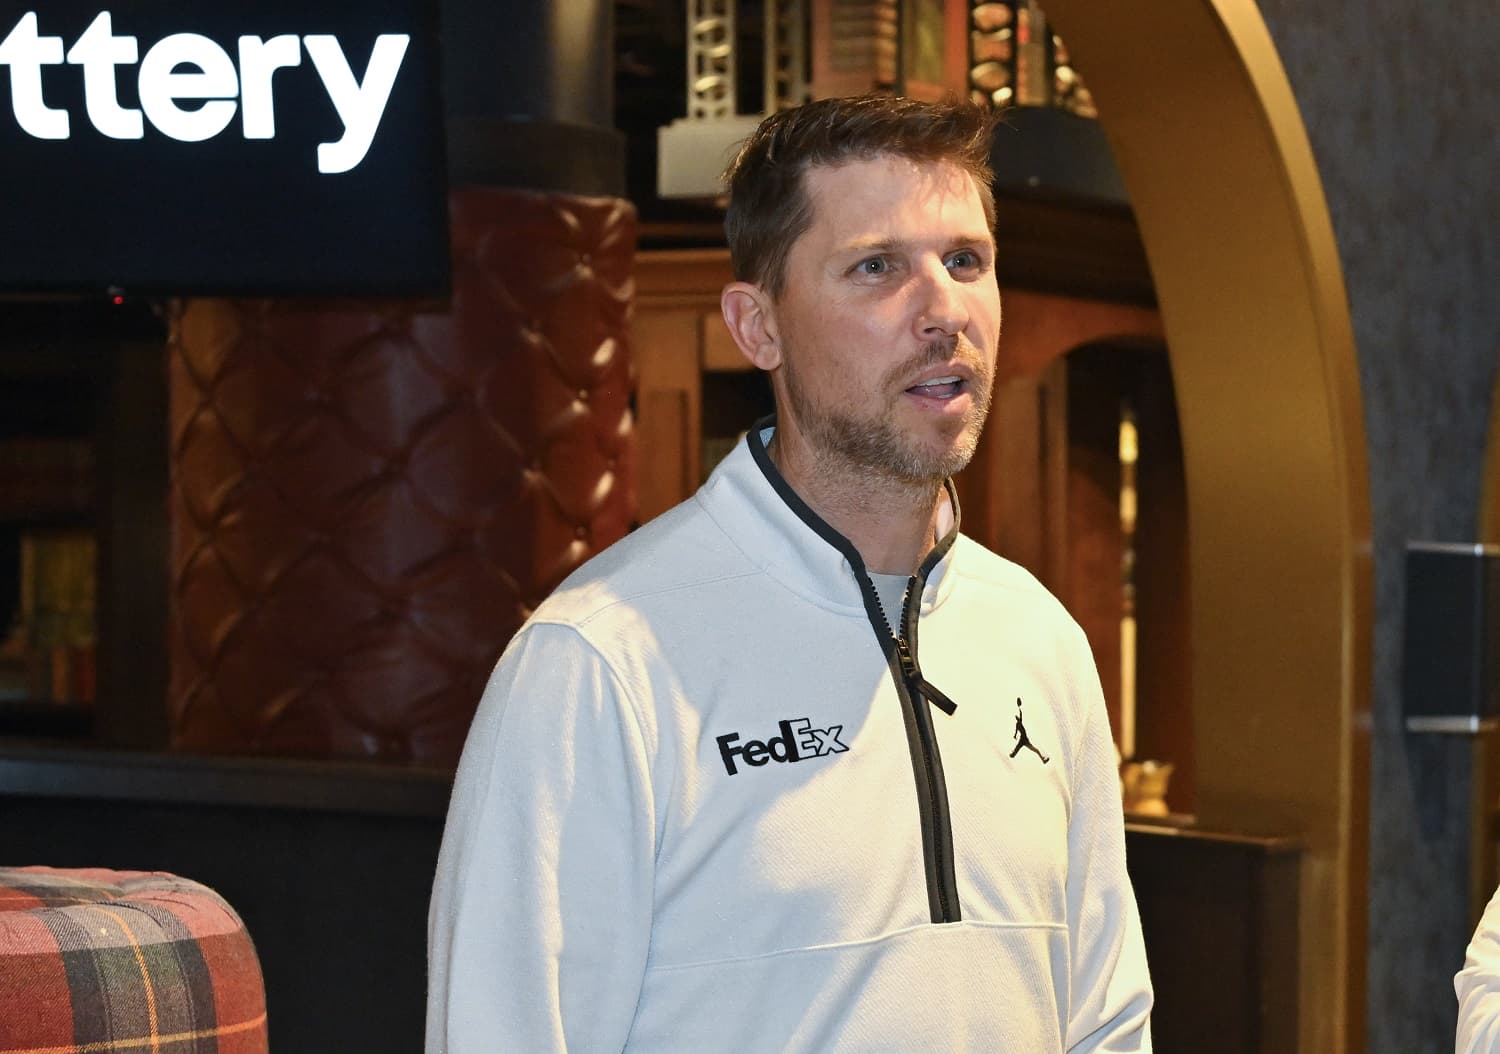 NASCAR driver Denny Hamlin during an appearance with PGA Tour star Rory McIlroy on May 2, 2023 in Charlotte, North Carolina.